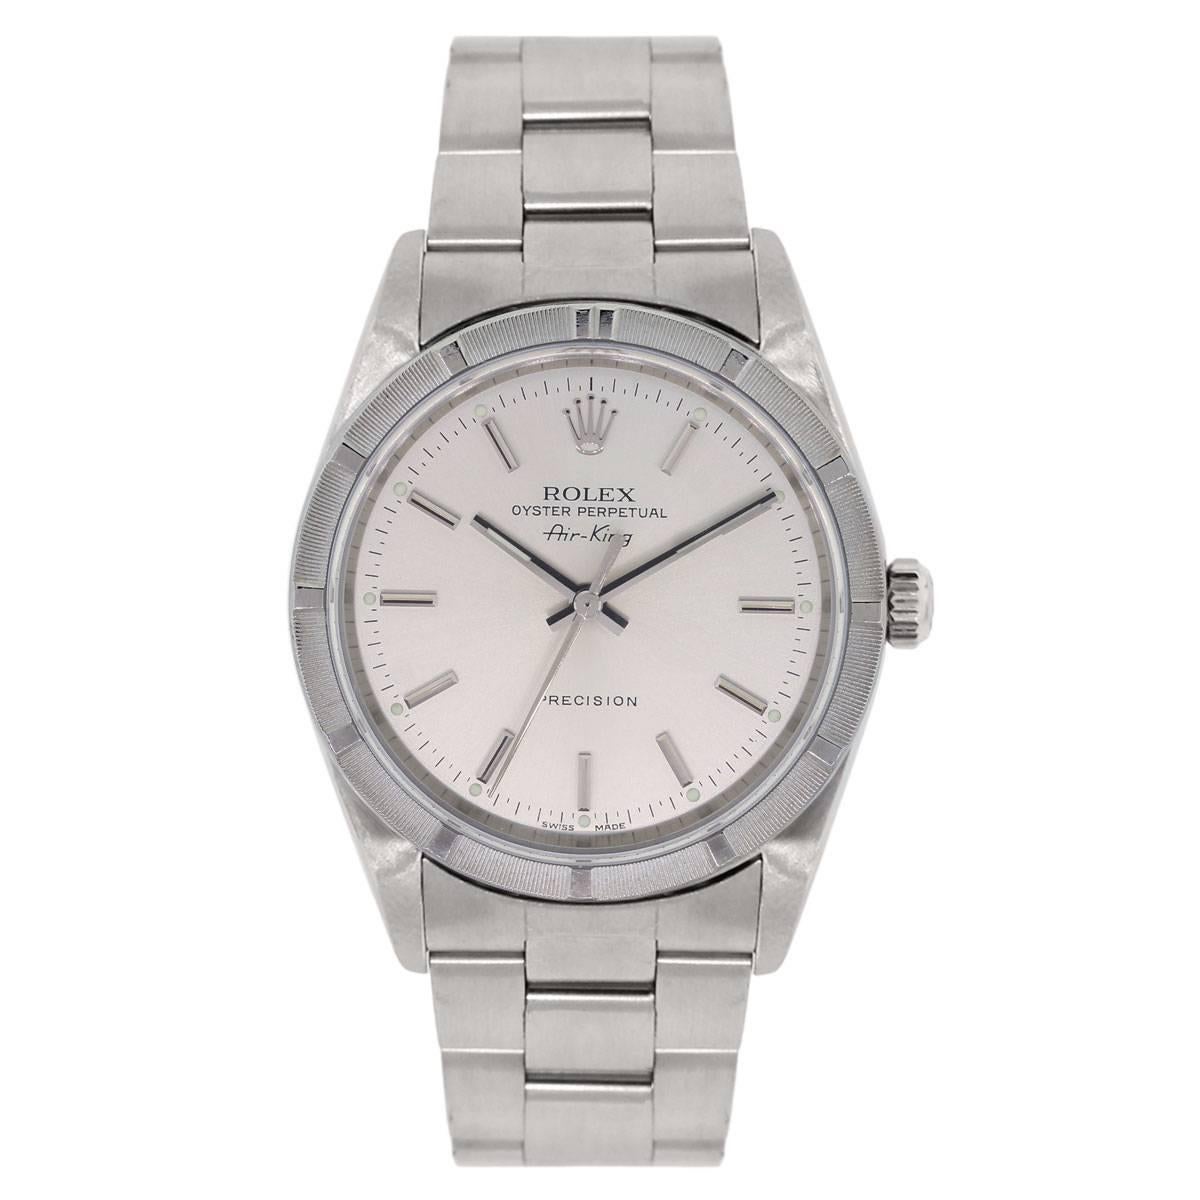 Brand: Rolex
MPN: 1410M
Model: Air King
Case Material: Stainless steel
Case Diameter: 34mm
Crystal: Sapphire crystal
Bezel: Stainless steel engine turned bezel
Dial: White stick dial
Bracelet: Stainless steel oyster band
Size: Will fit a 6.75"